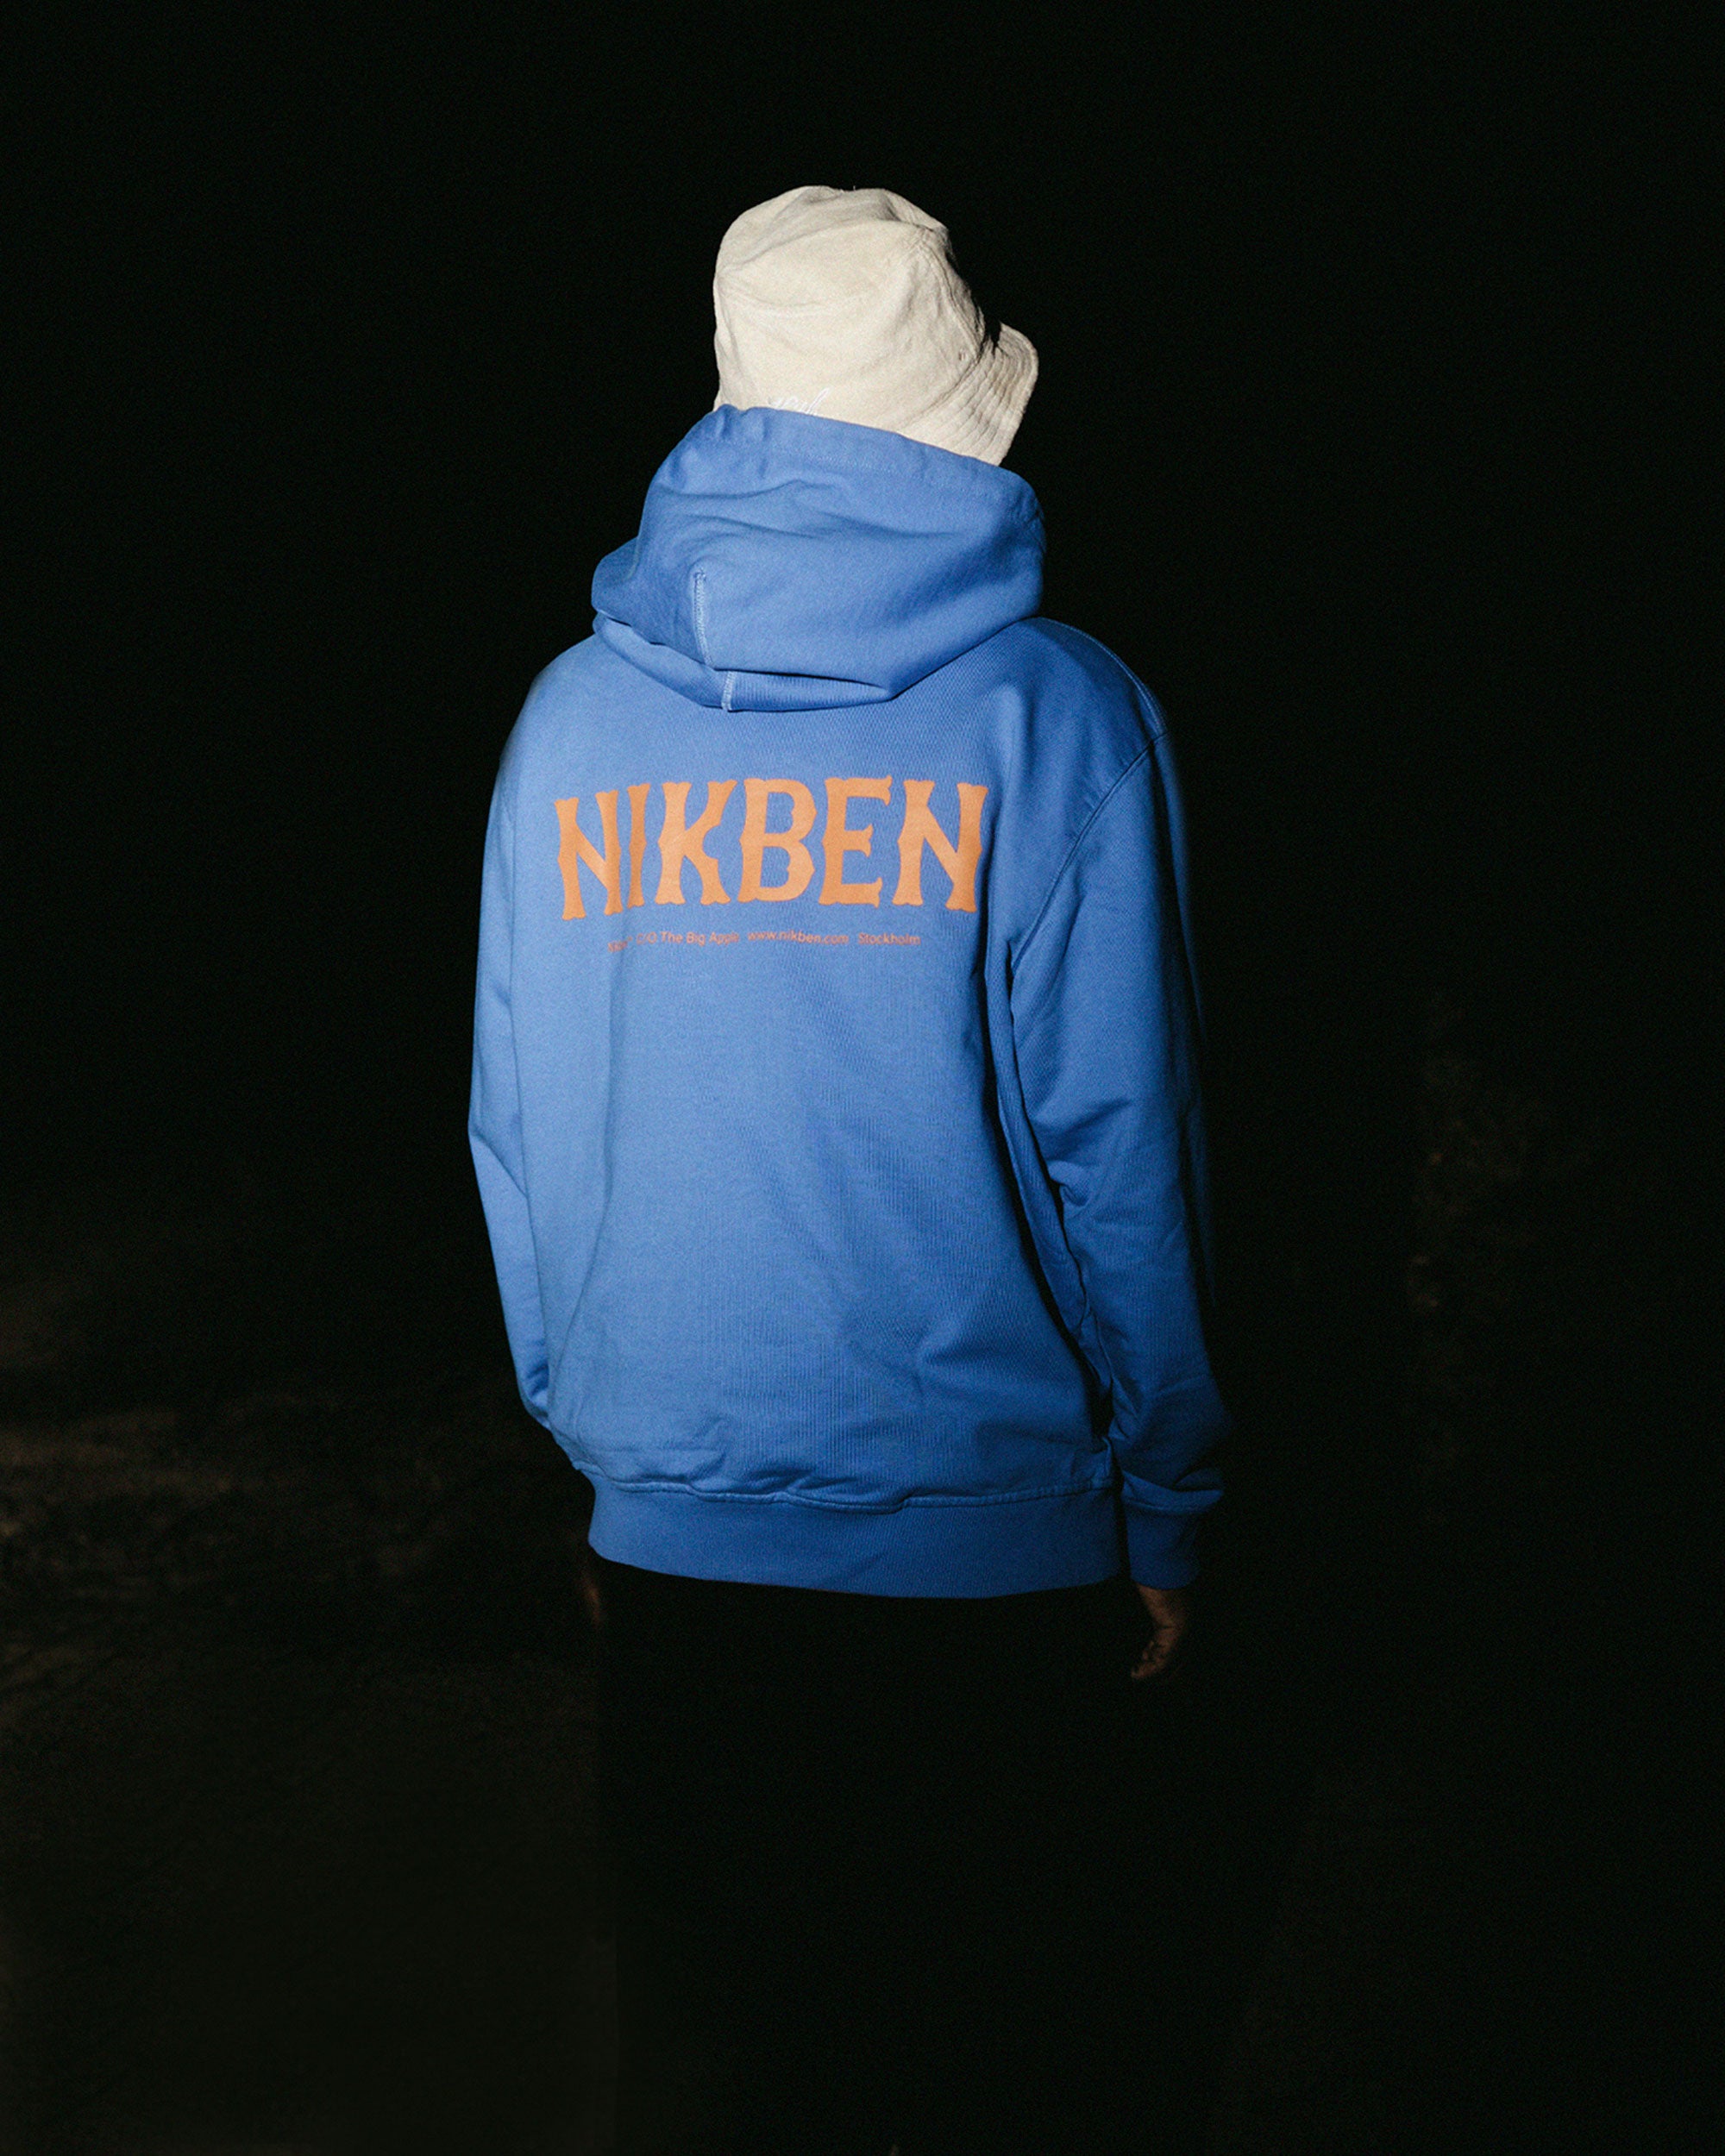 Back view of male model wearing blue unisex hoodie with orange 